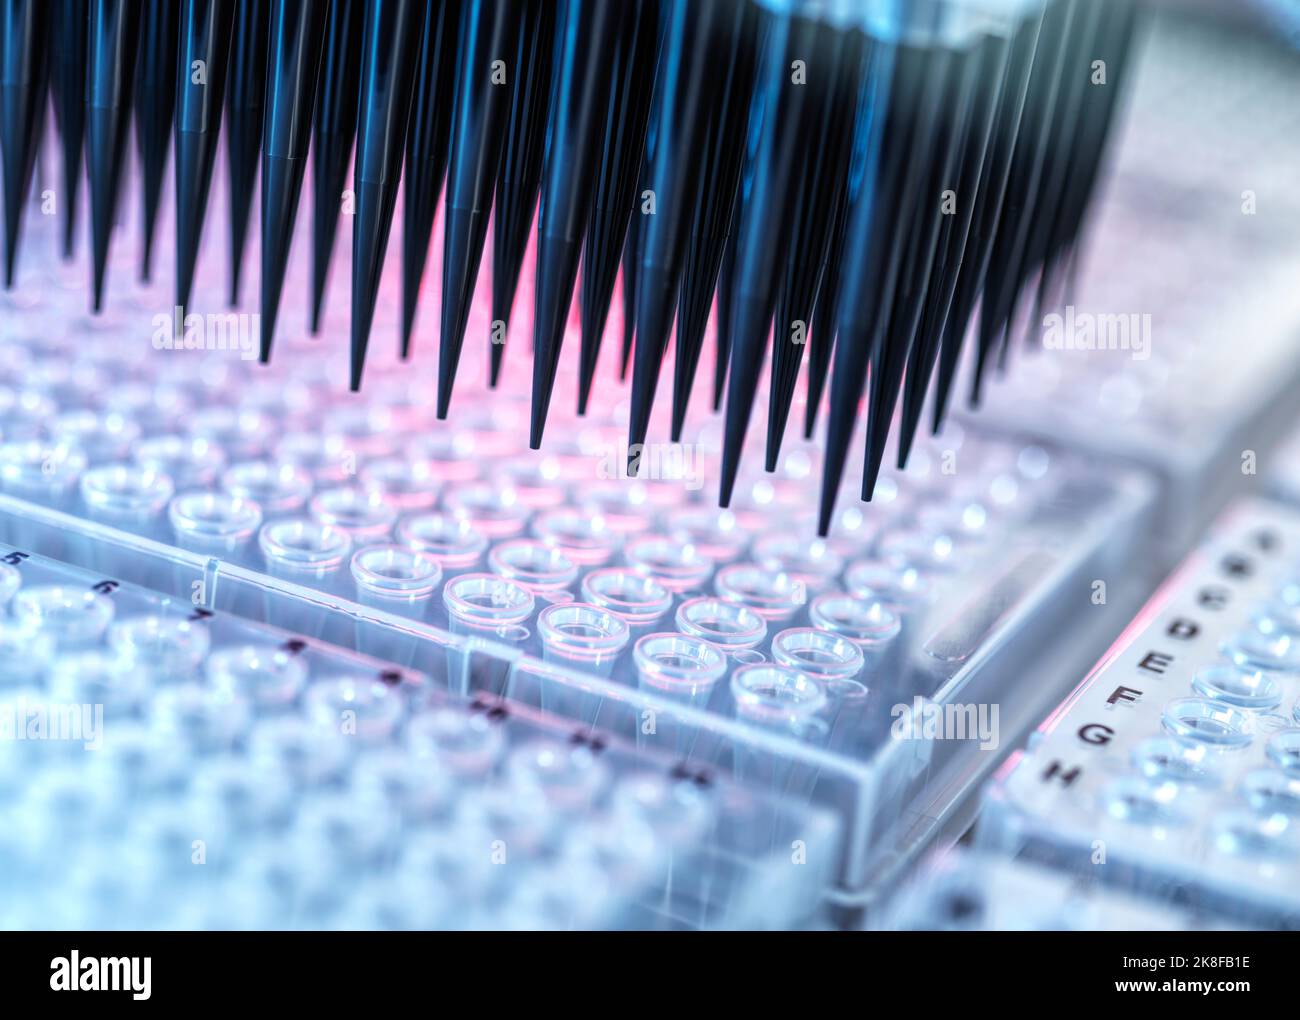 Analysis of samples in microplates by automation robotics Stock Photo